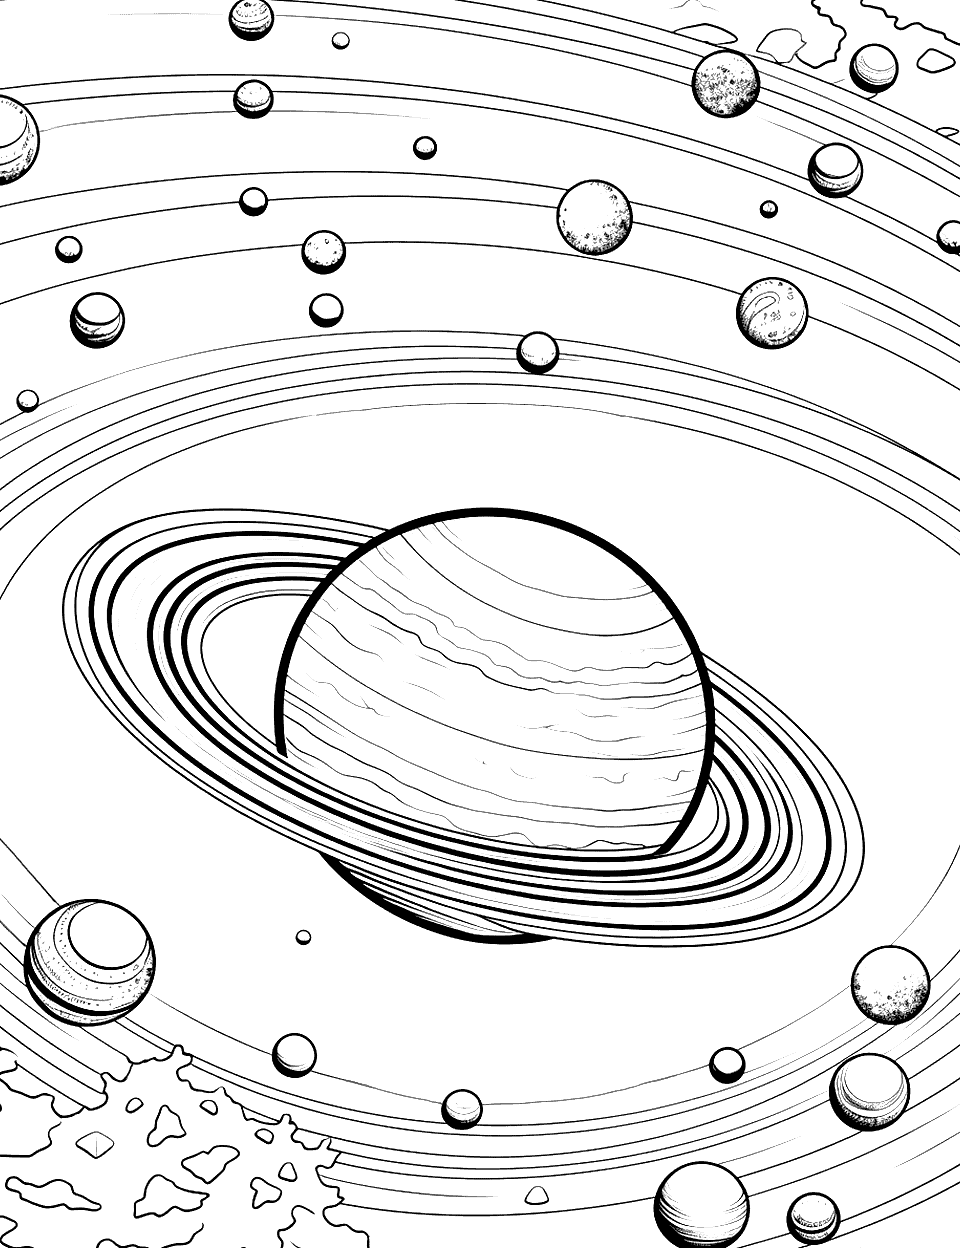 Saturn's Rings Solar System Coloring Page - A close-up view of Saturn’s rings, showing the layers.